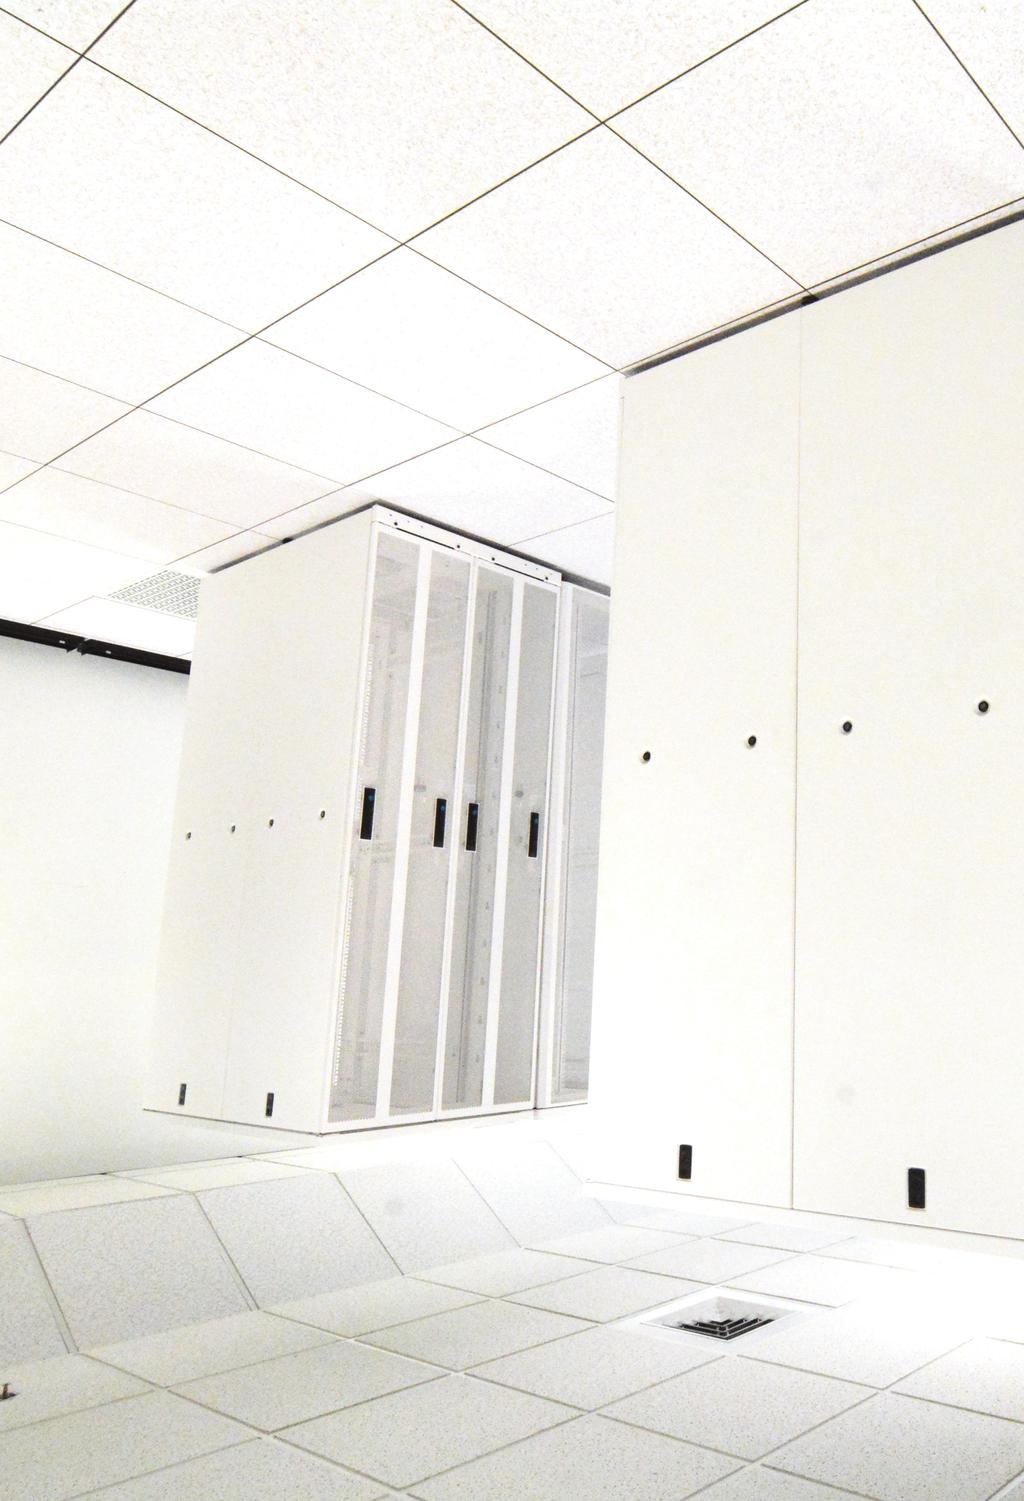 BRC_Cabinet_B.qxp_B 3/15/18 10:25 AM Page 3 8 IT IS ALL ABOUT MAXIMIZING SPACE AND EFFICIENCY Space utilization and efficiency are the most important considerations in a data center infrastructure.